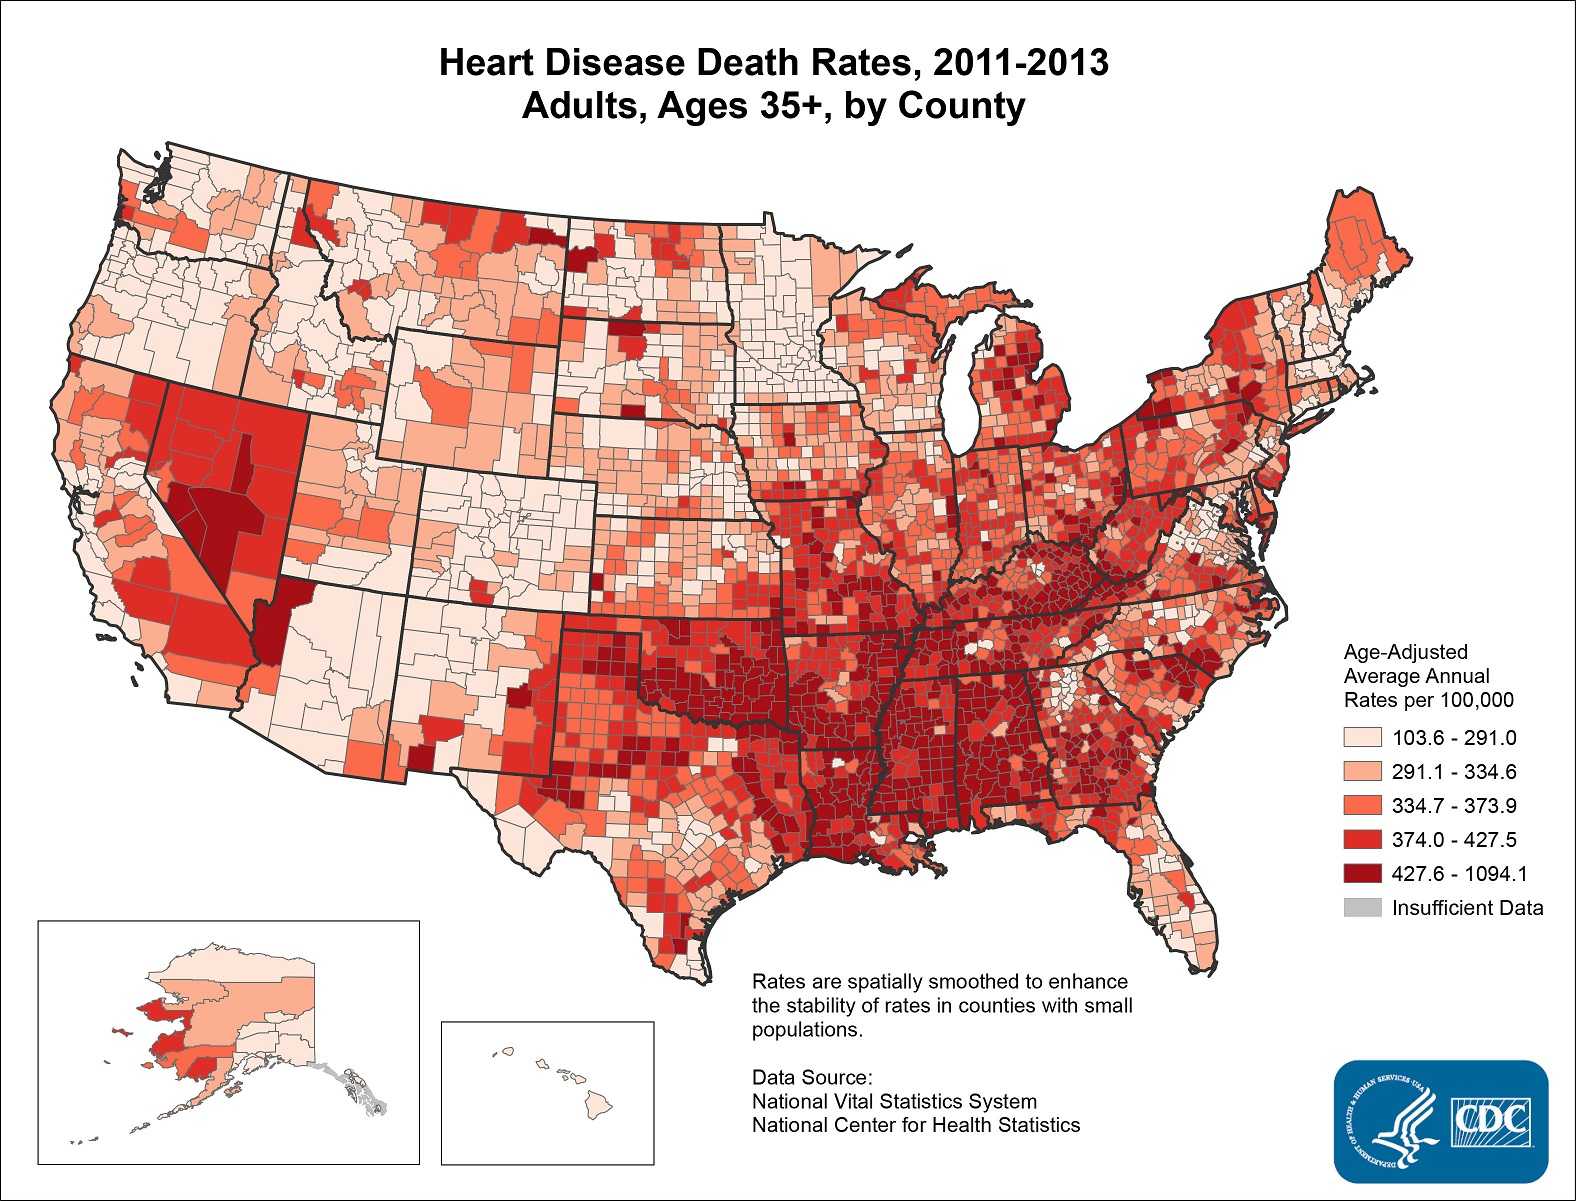 The map shows that concentrations of counties with the highest heart disease death rates - meaning the top quintile - are located primarily in Mississippi, Oklahoma, Louisiana, Arkansas, and Alabama.  Pockets of high-rate counties were also found in Georgia, Kentucky, Tennessee, Missouri, and Nevada.